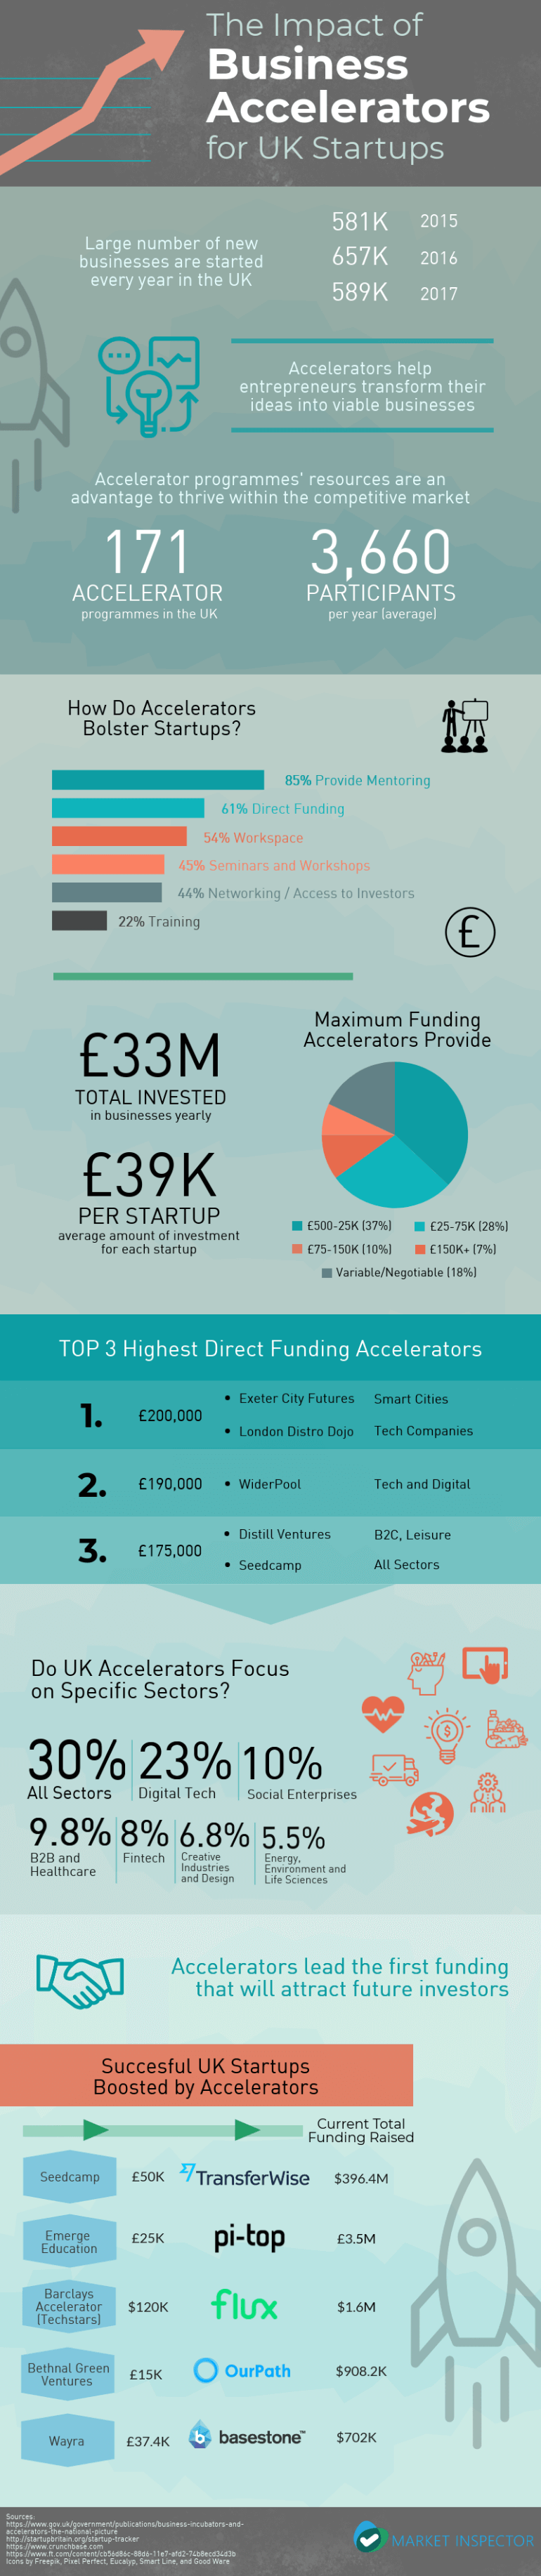 impact_of_business_accelerators_for_uk_startups-noresize